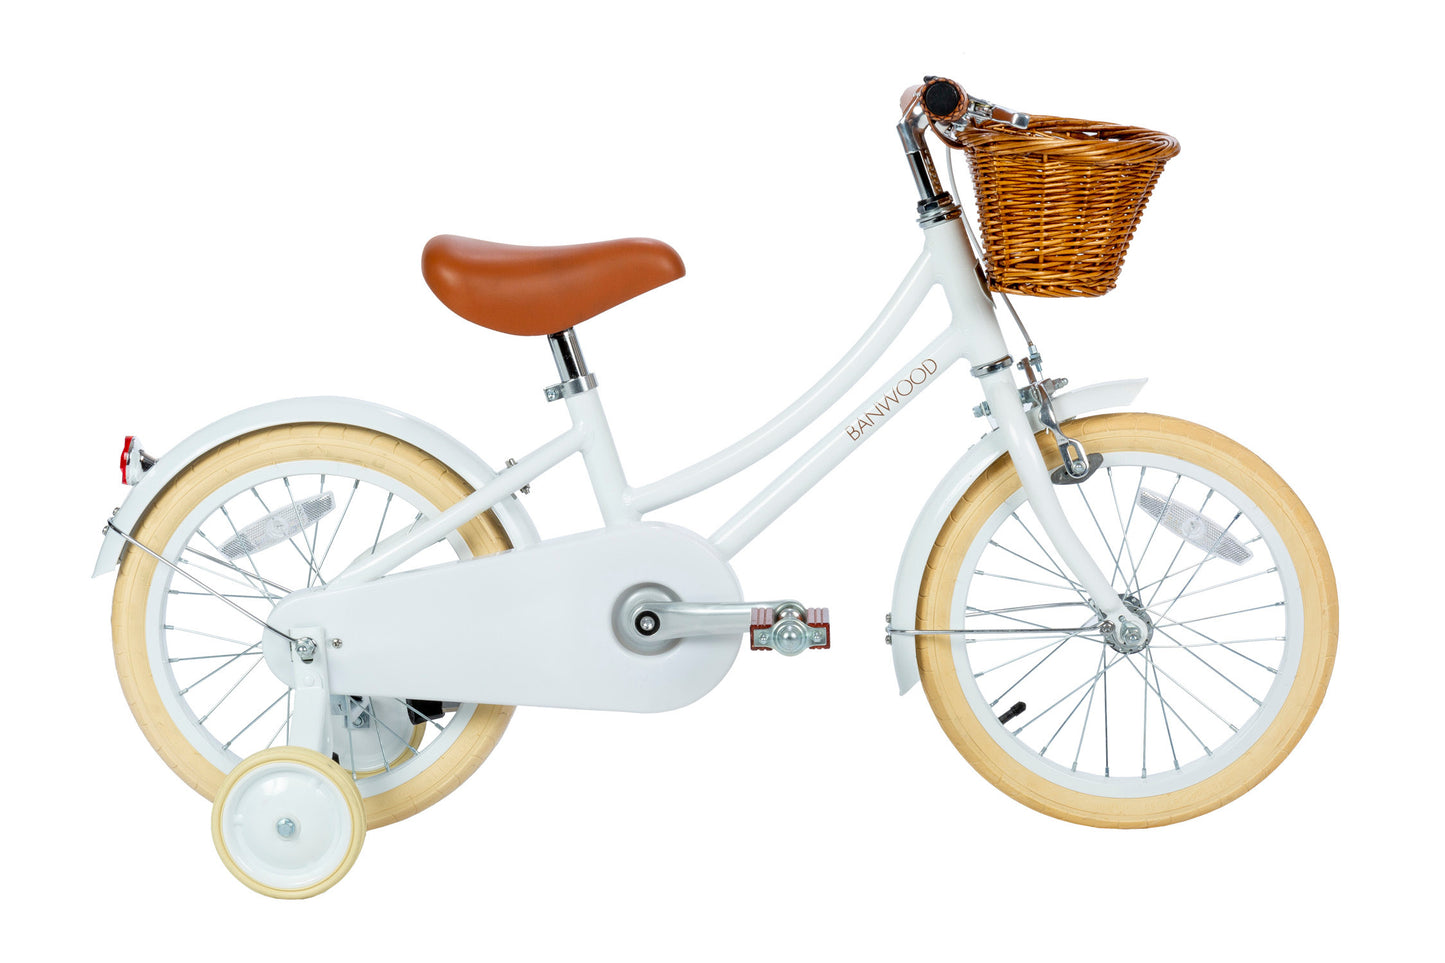 BANWOOD, Classic Children's Bicycle, different colors